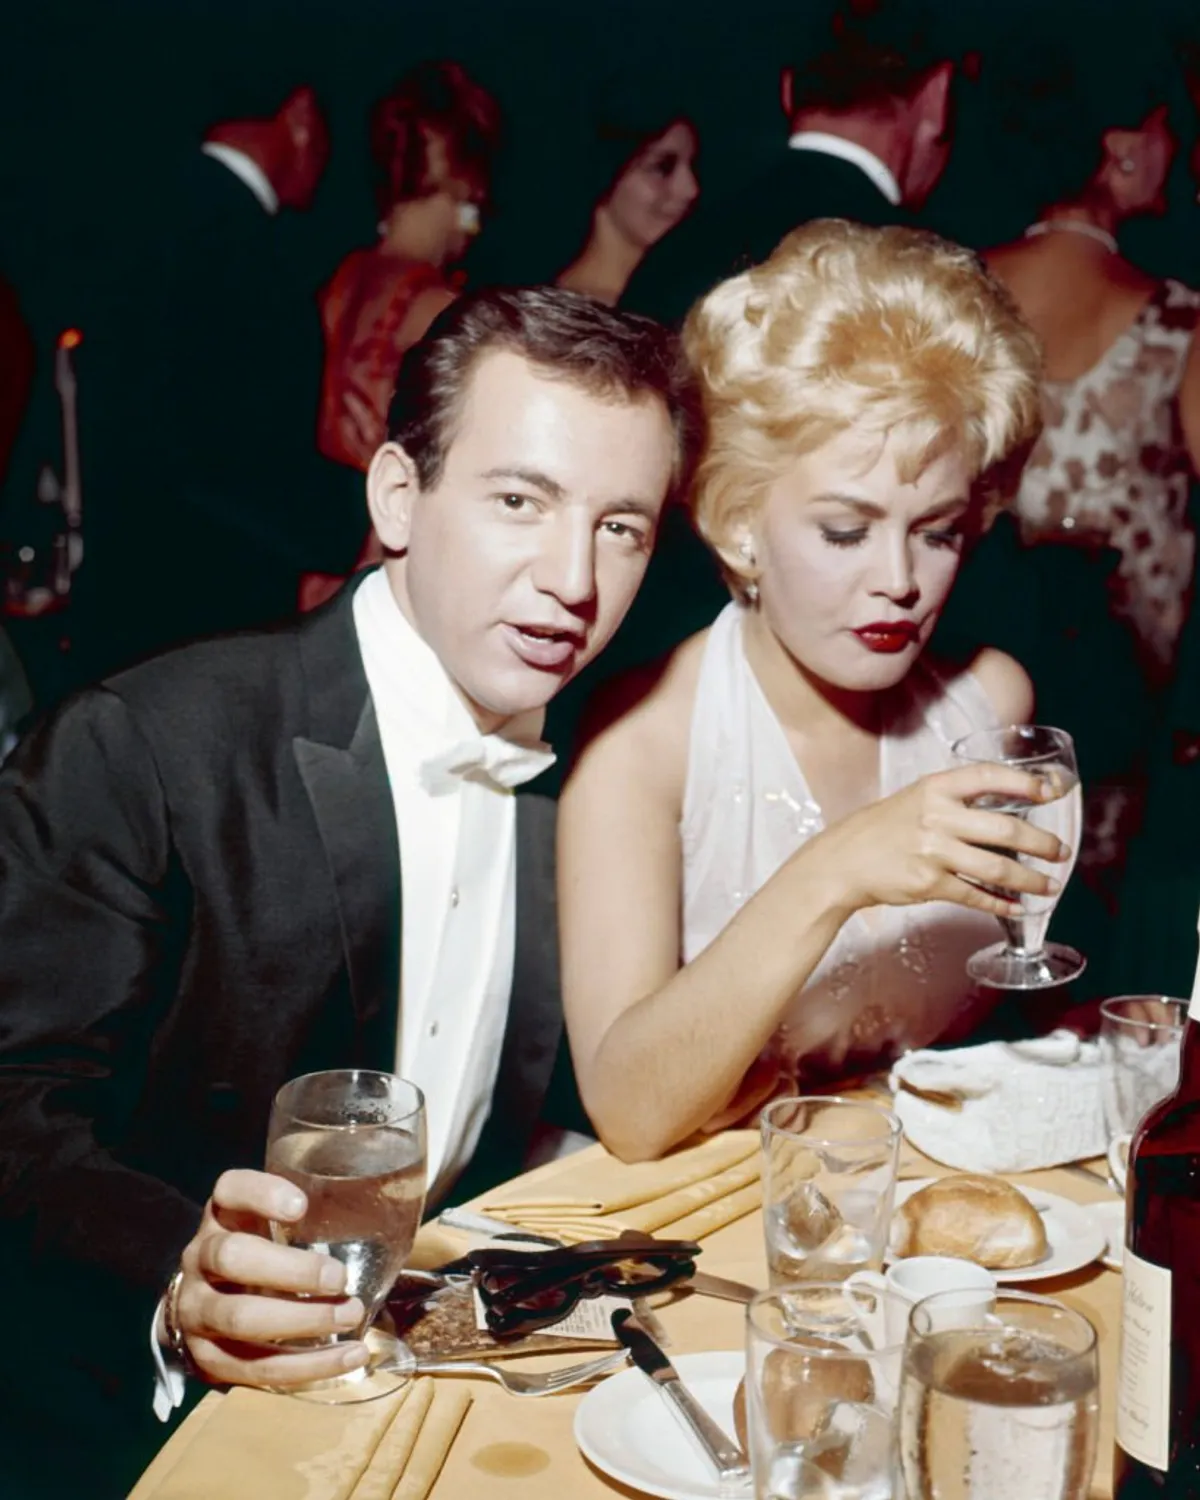 American actor and singer Bobby Darin with his wife, actress Sandra Dee at the 33rd Academy Awards, Santa Monica, California on April 17, 1961. | Source: Getty Images